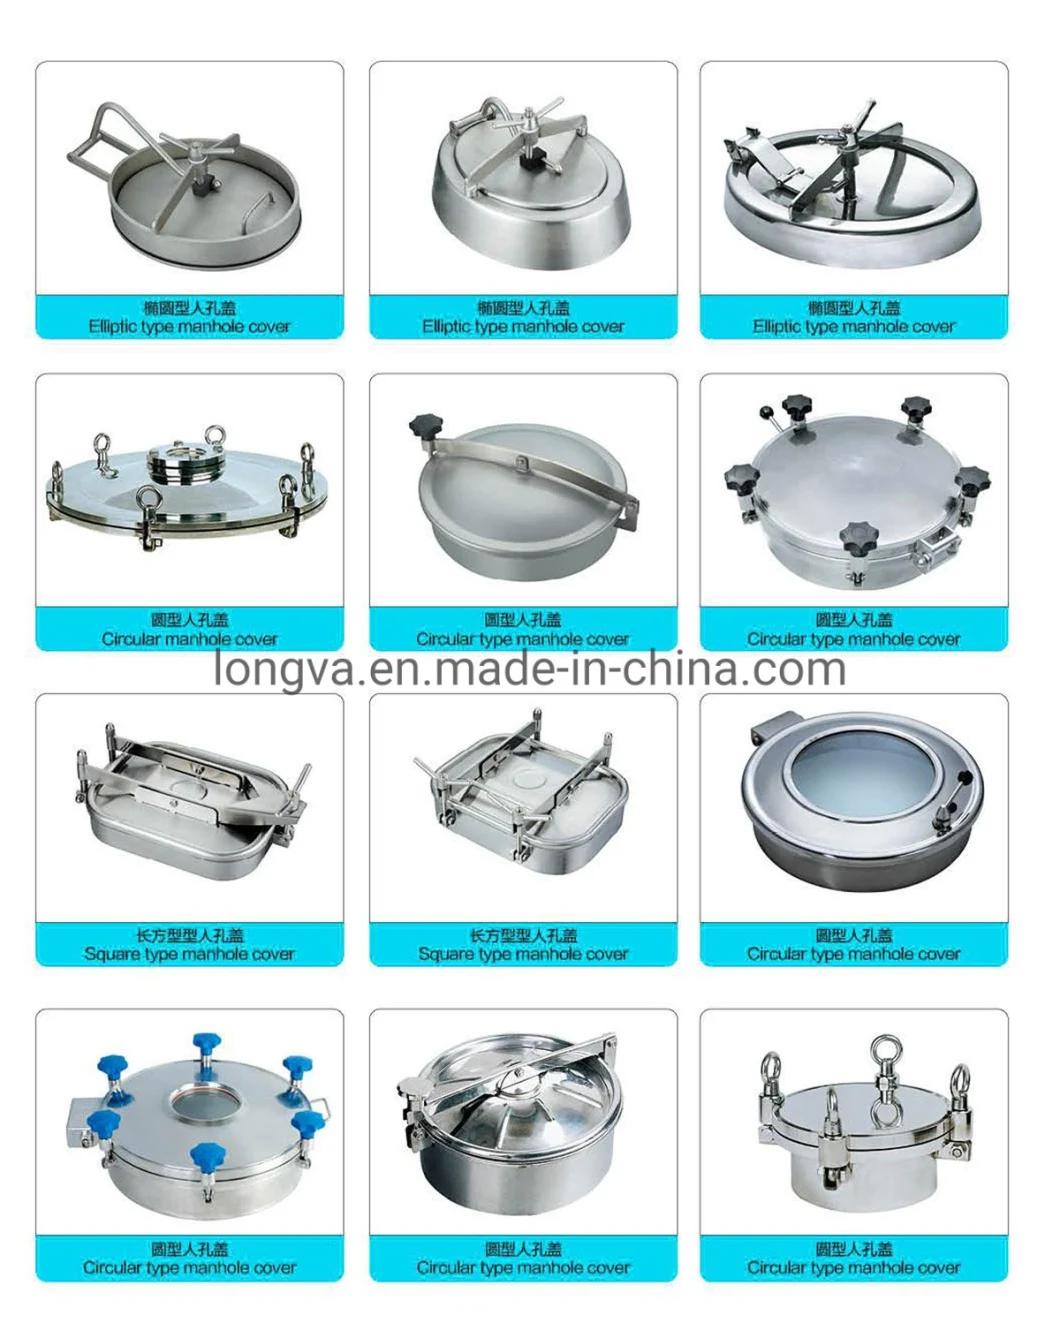 DN400 Round Shape Sanitary Stainless Steel Non-Pressure Tank Manhole Cover